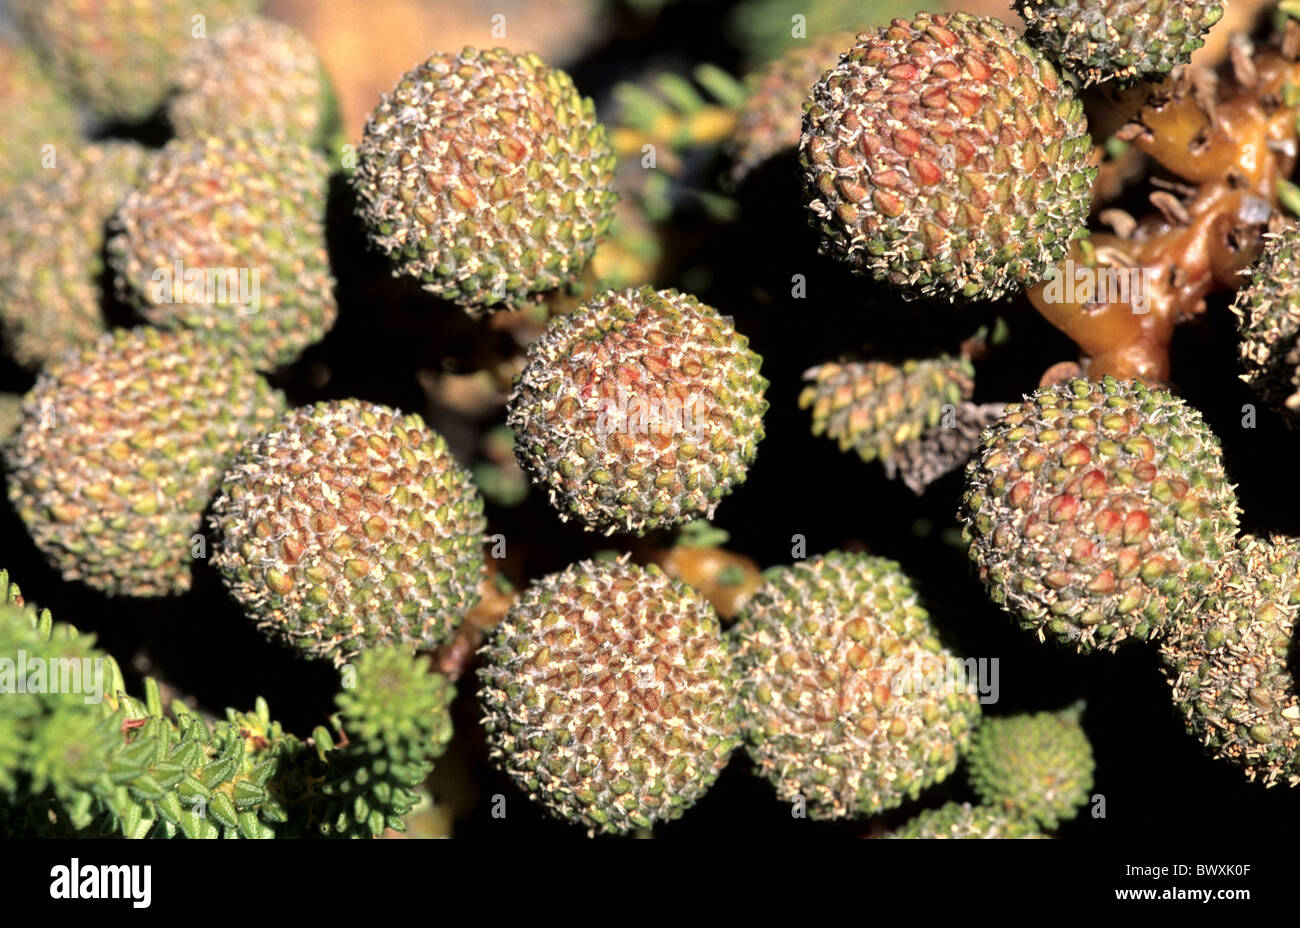 Erika Erica heracea cape South Africa Fynbos fruits plant nature flowers fruit state close-up Stock Photo